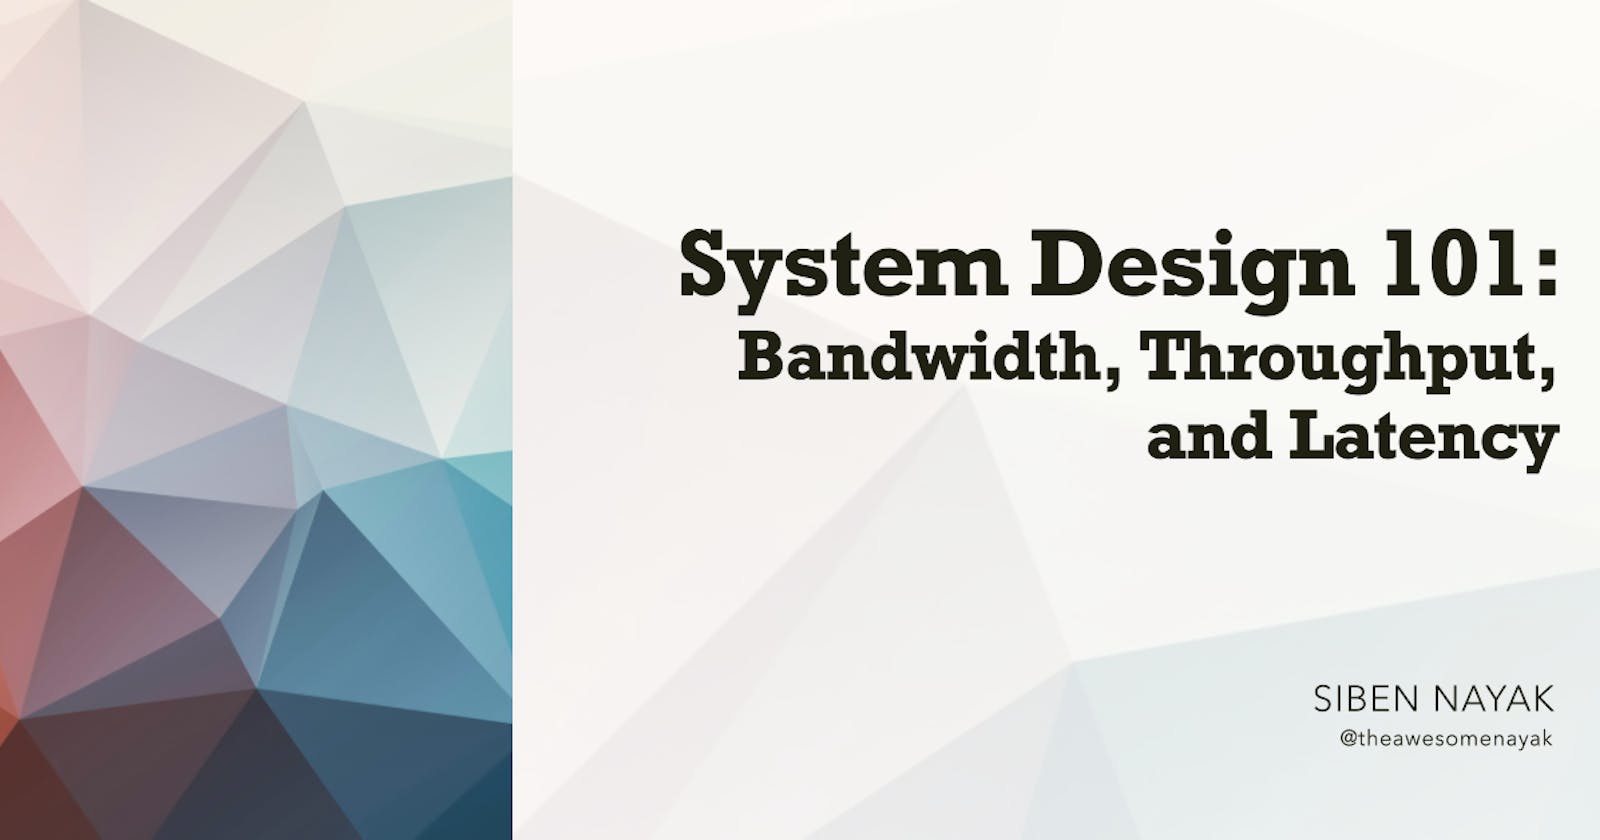 System Design 101 - Bandwidth, Throughput, and Latency